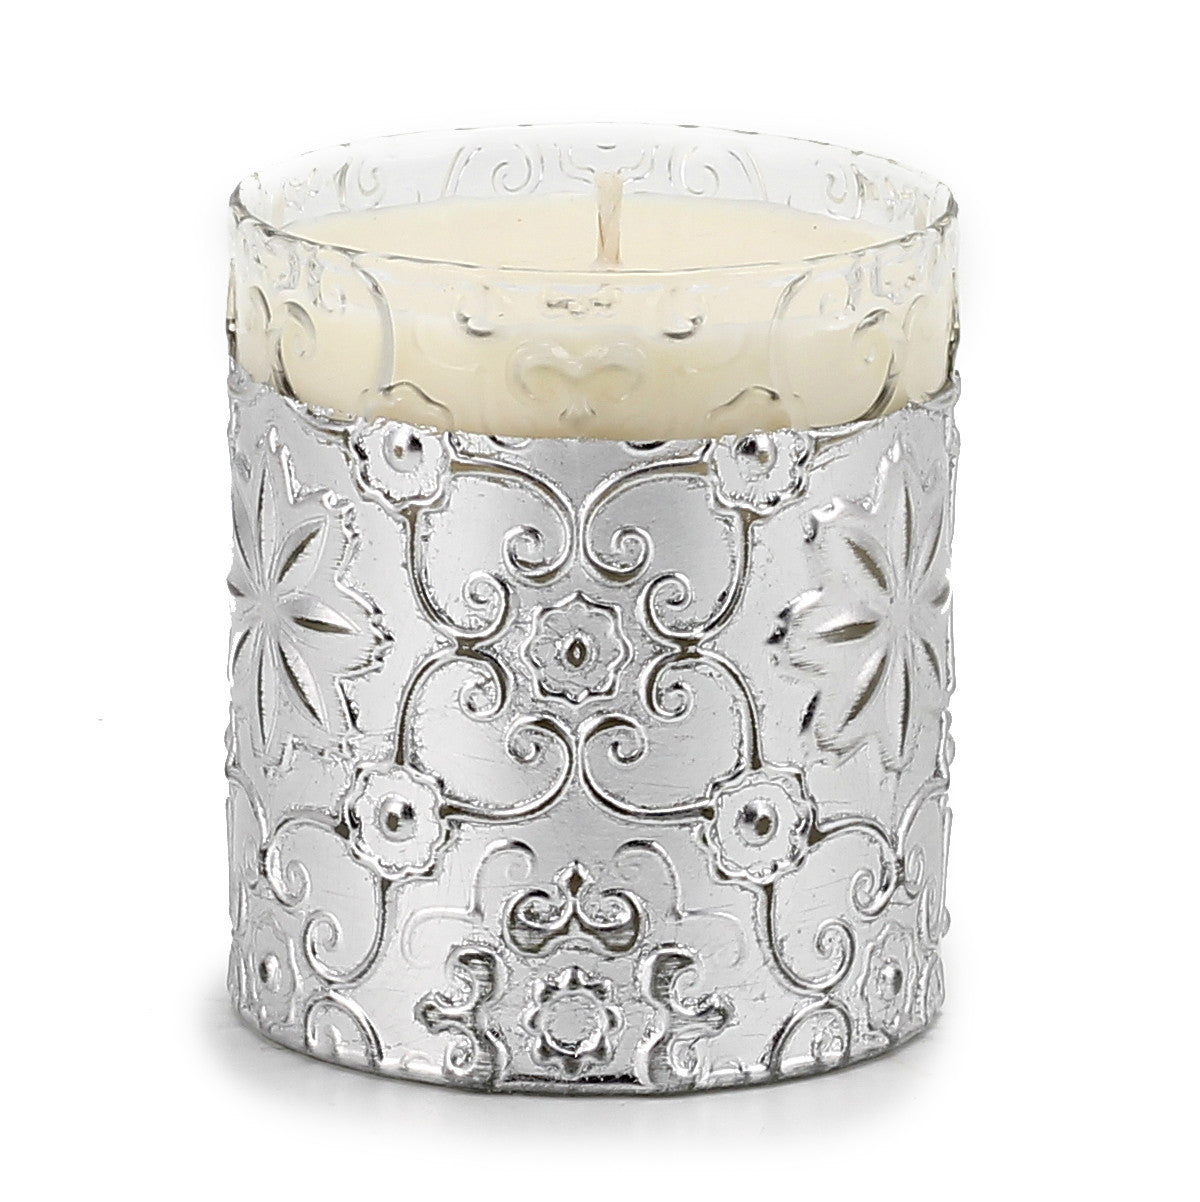 CRYSTAL CANDLES: Bass relief Design with Silver Leaf finish ~ (10 Oz) - Artistica.com